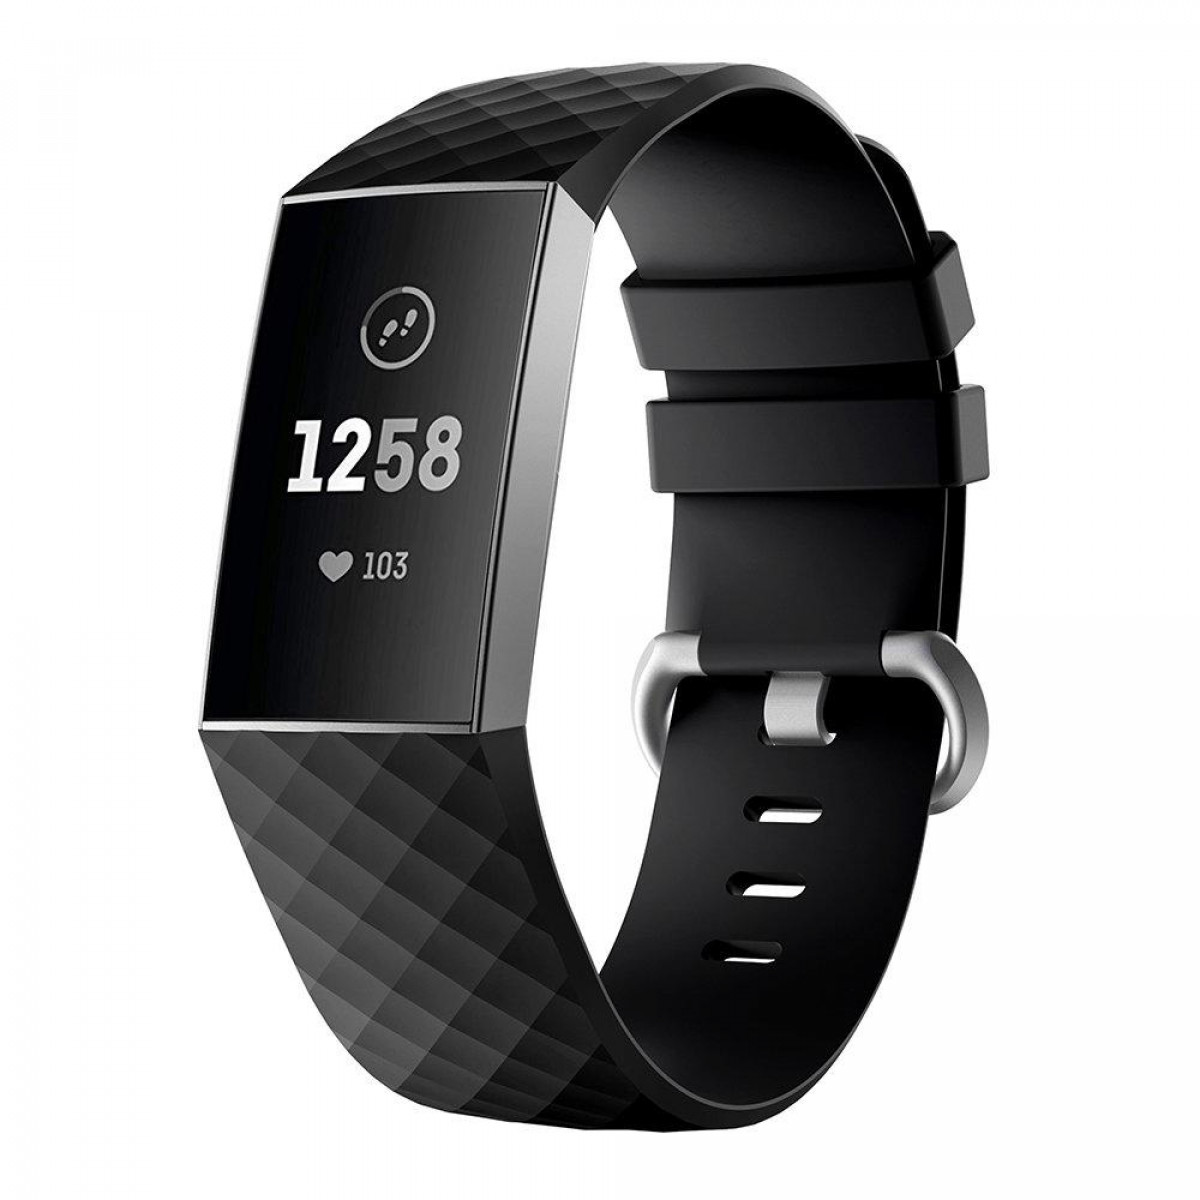 INF Fitbit Charge 3/4 Armband (L), Charge (L), Schwarz Silikon Armband, 3/4 Schwarz Fitbit